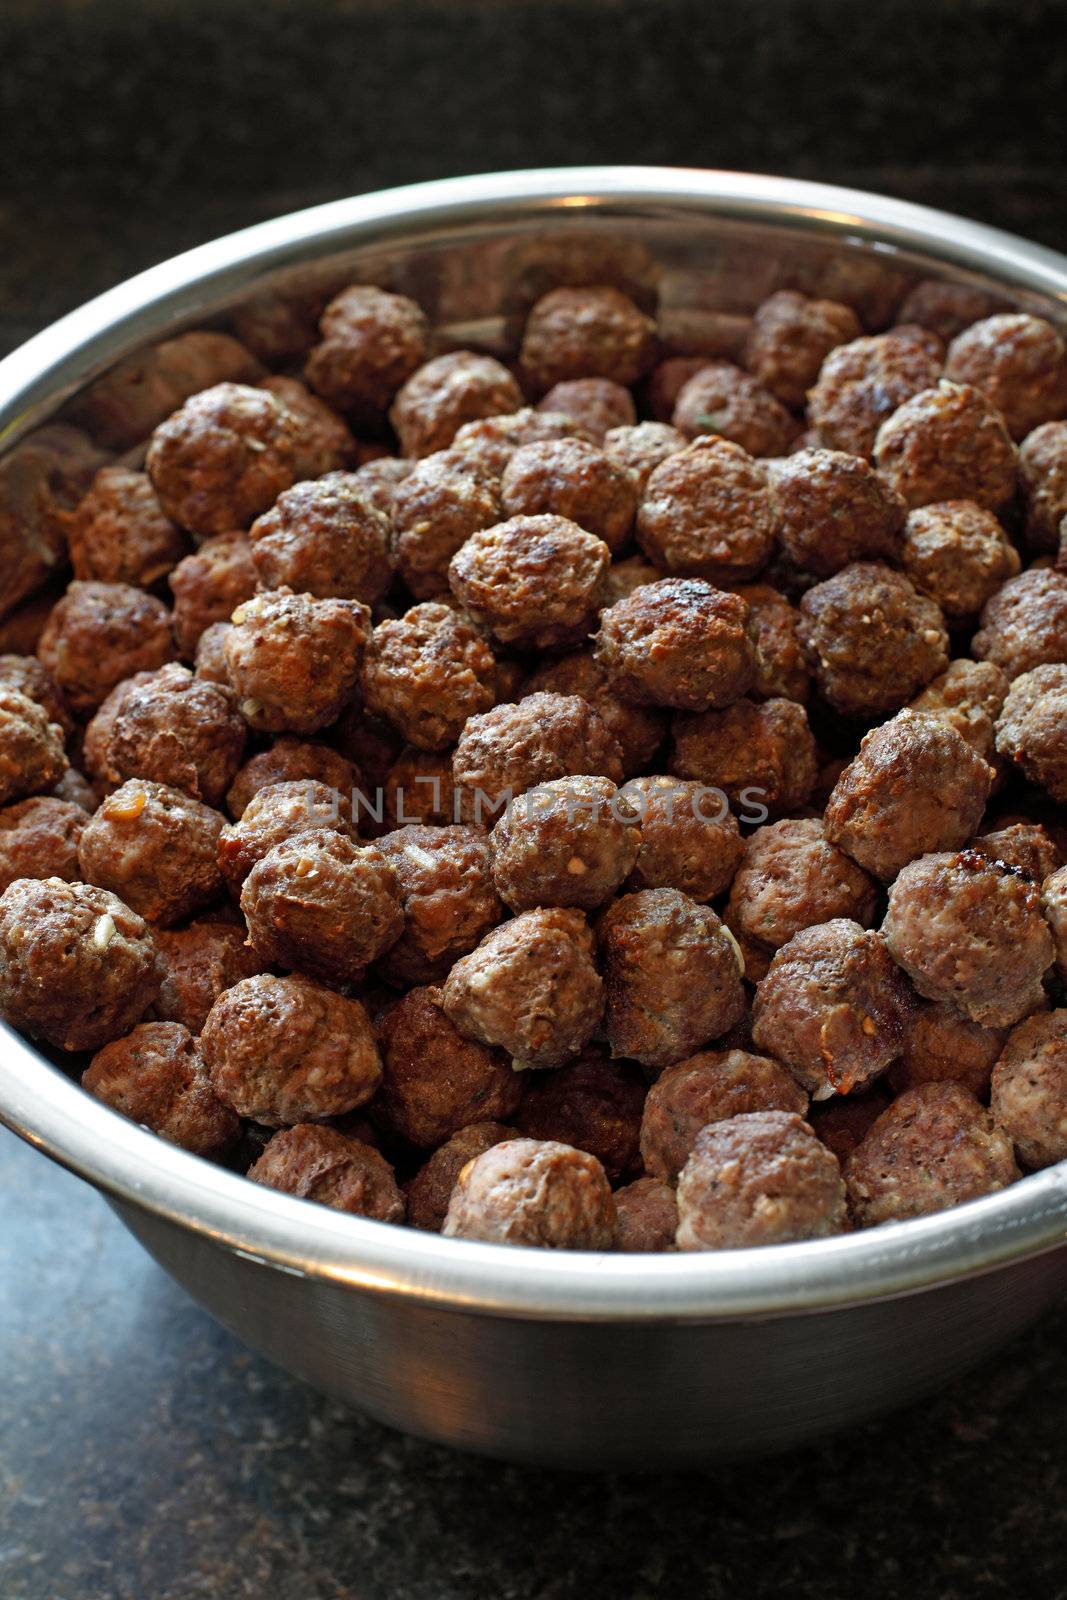 Large bowl of meatballs by sumners